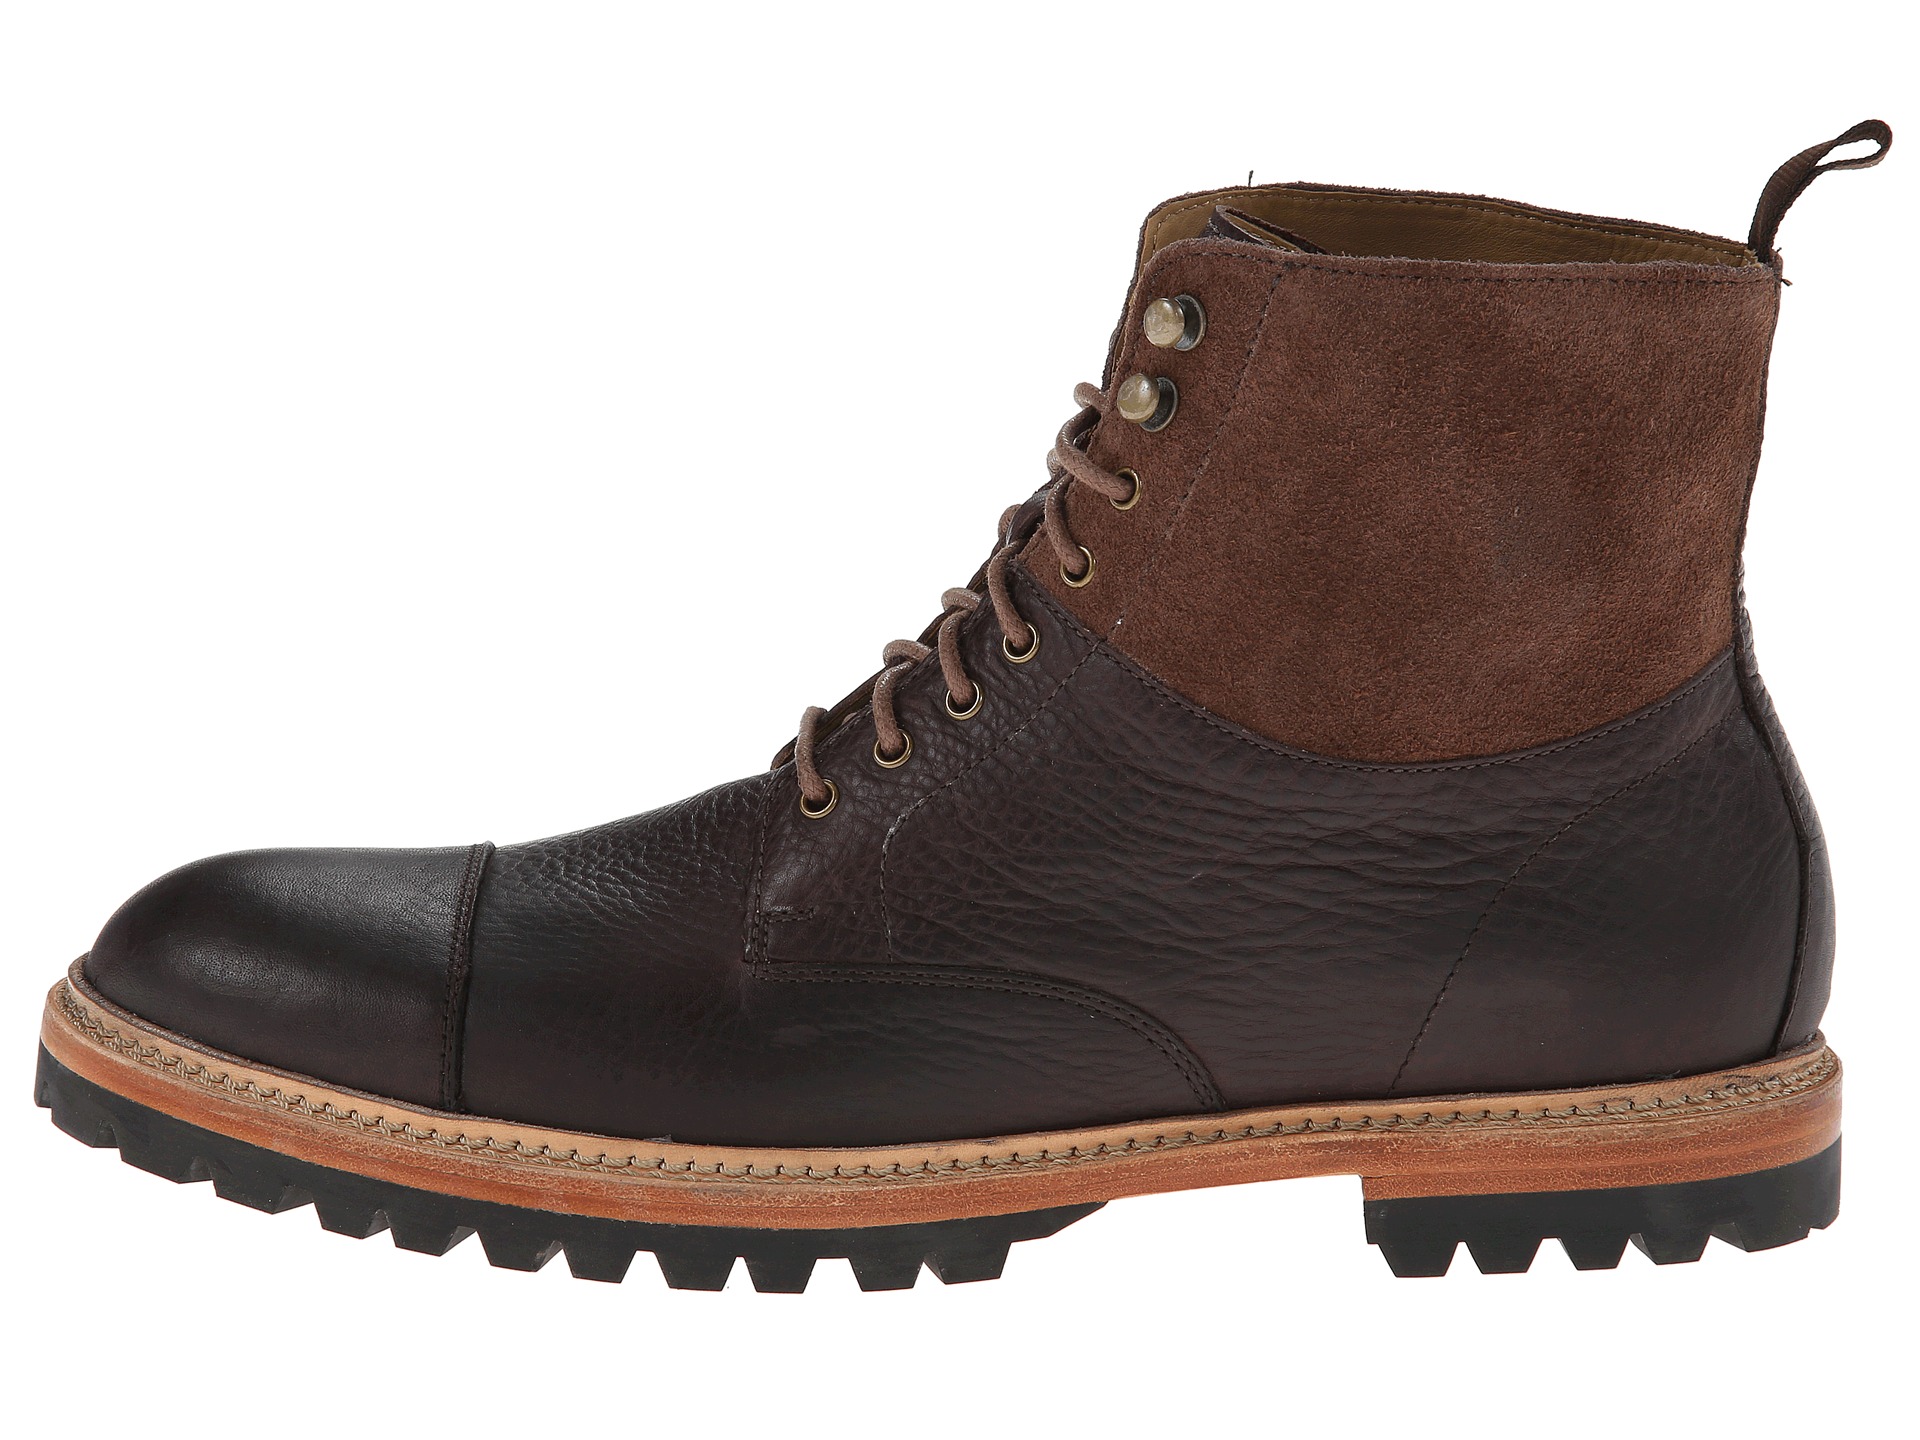 Cole Haan Judson Captoe Boot, Shoes | Shipped Free at Zappos